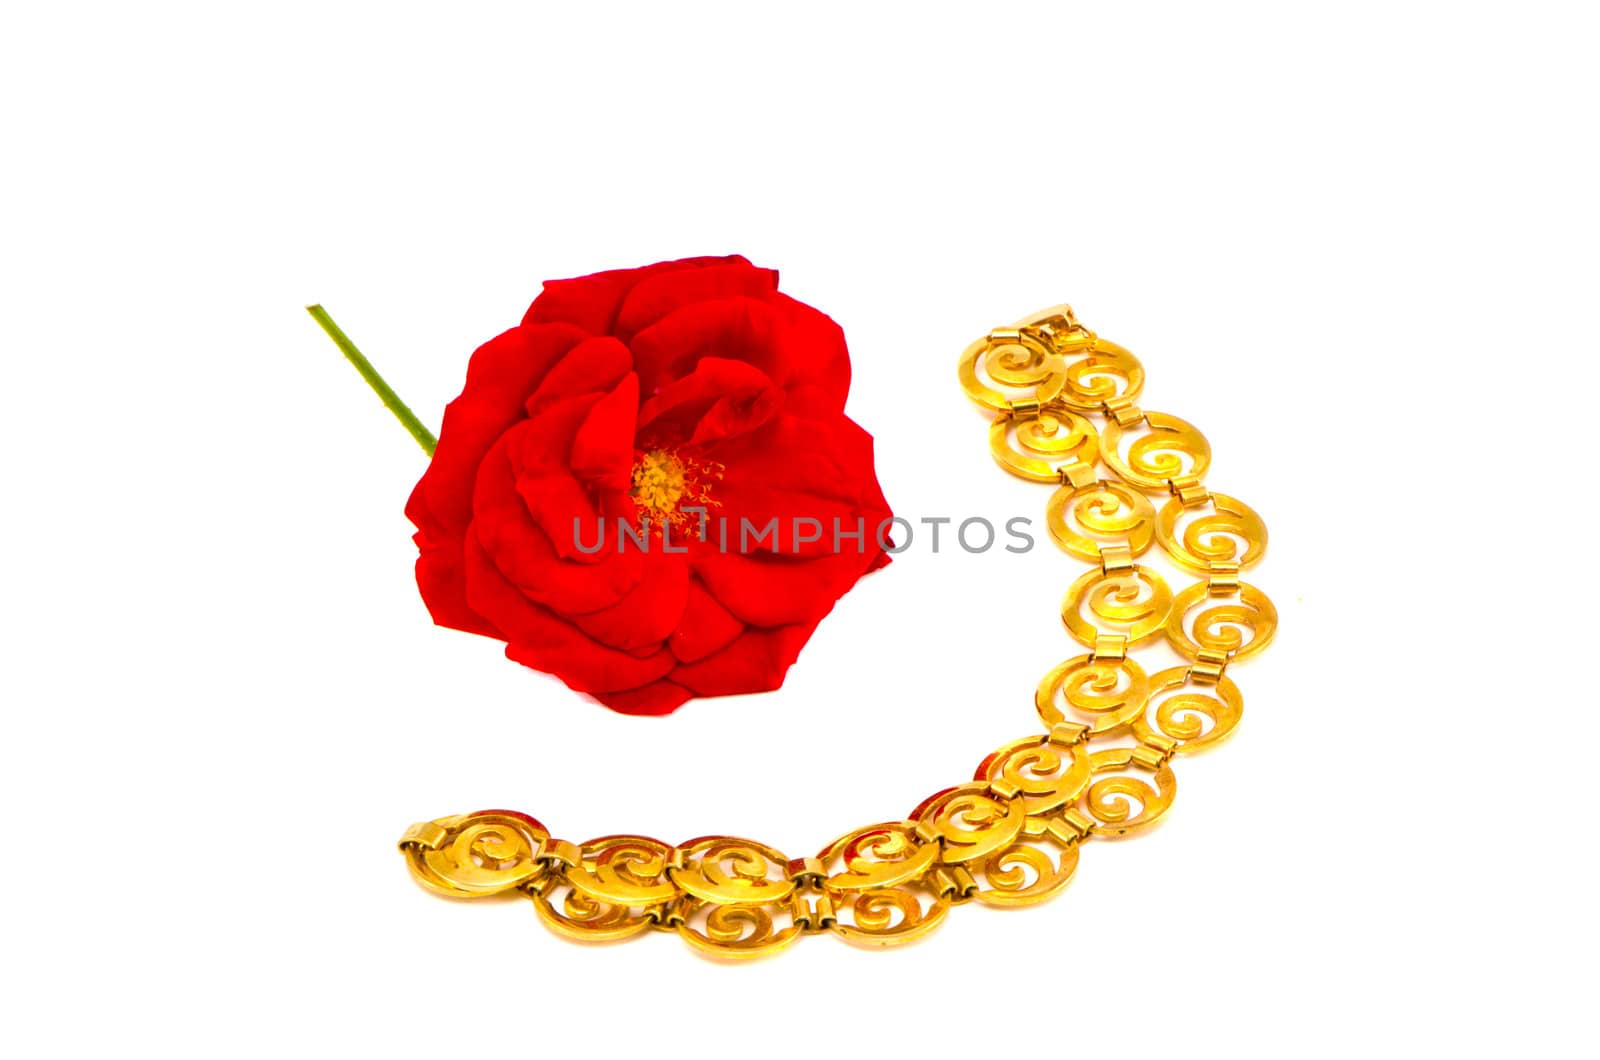 red rose and golden chain necklace on white by alis_photo